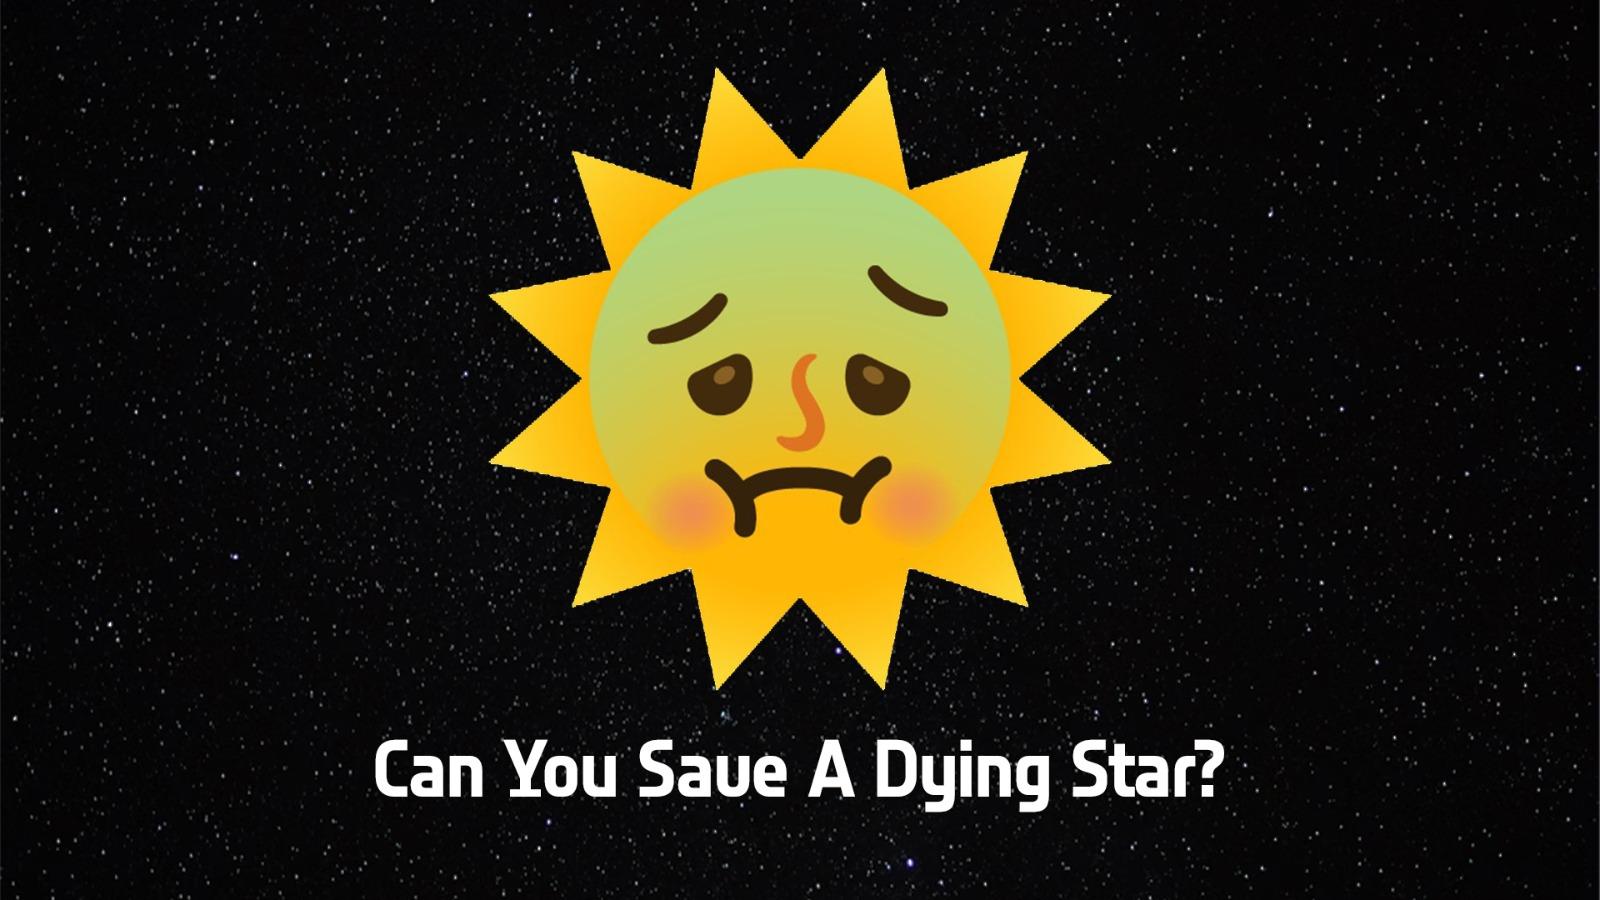 Can You Save A Dying Star?